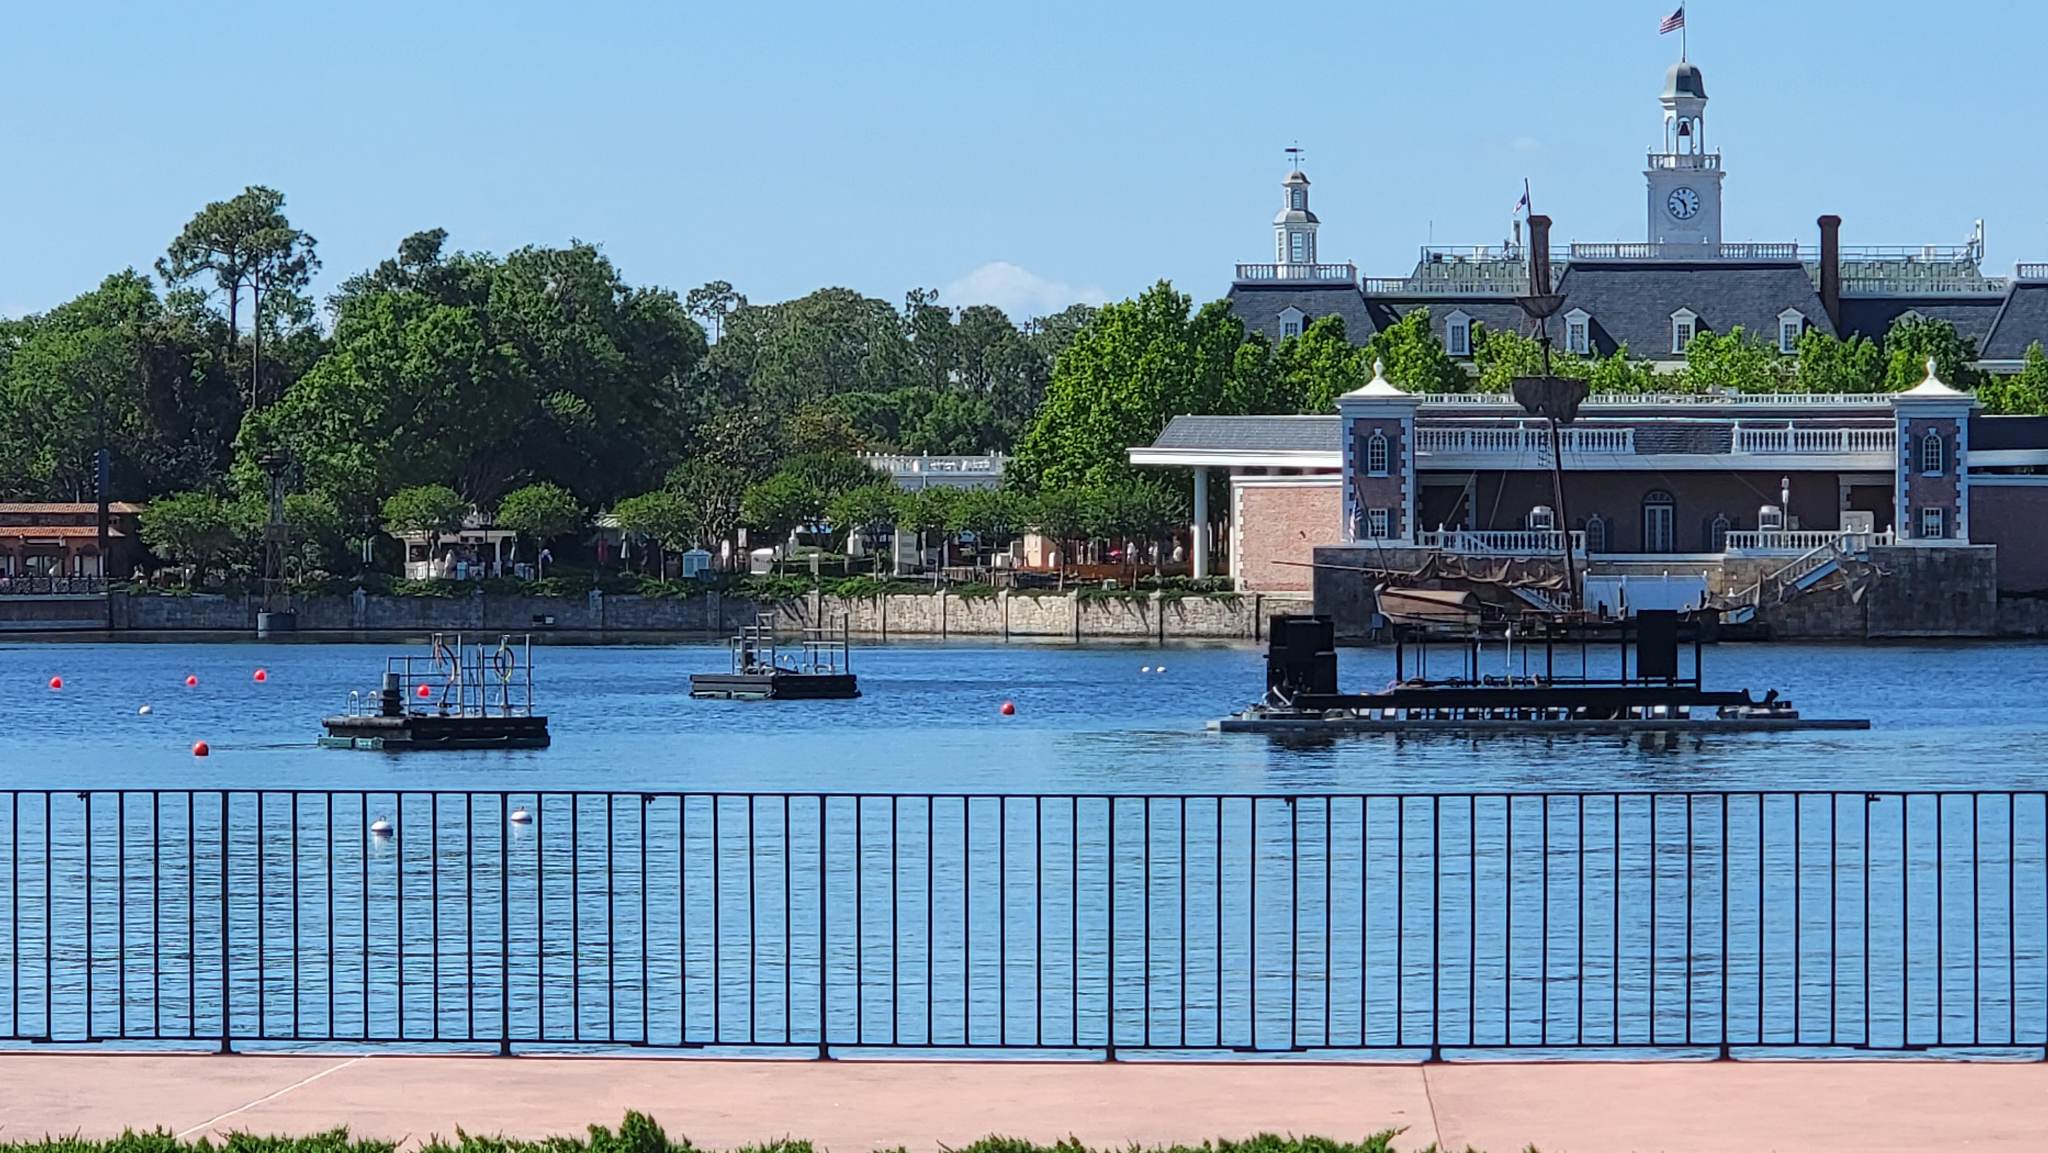 New Mystery Platforms Arrive in EPCOT for Possible New Nighttime Show